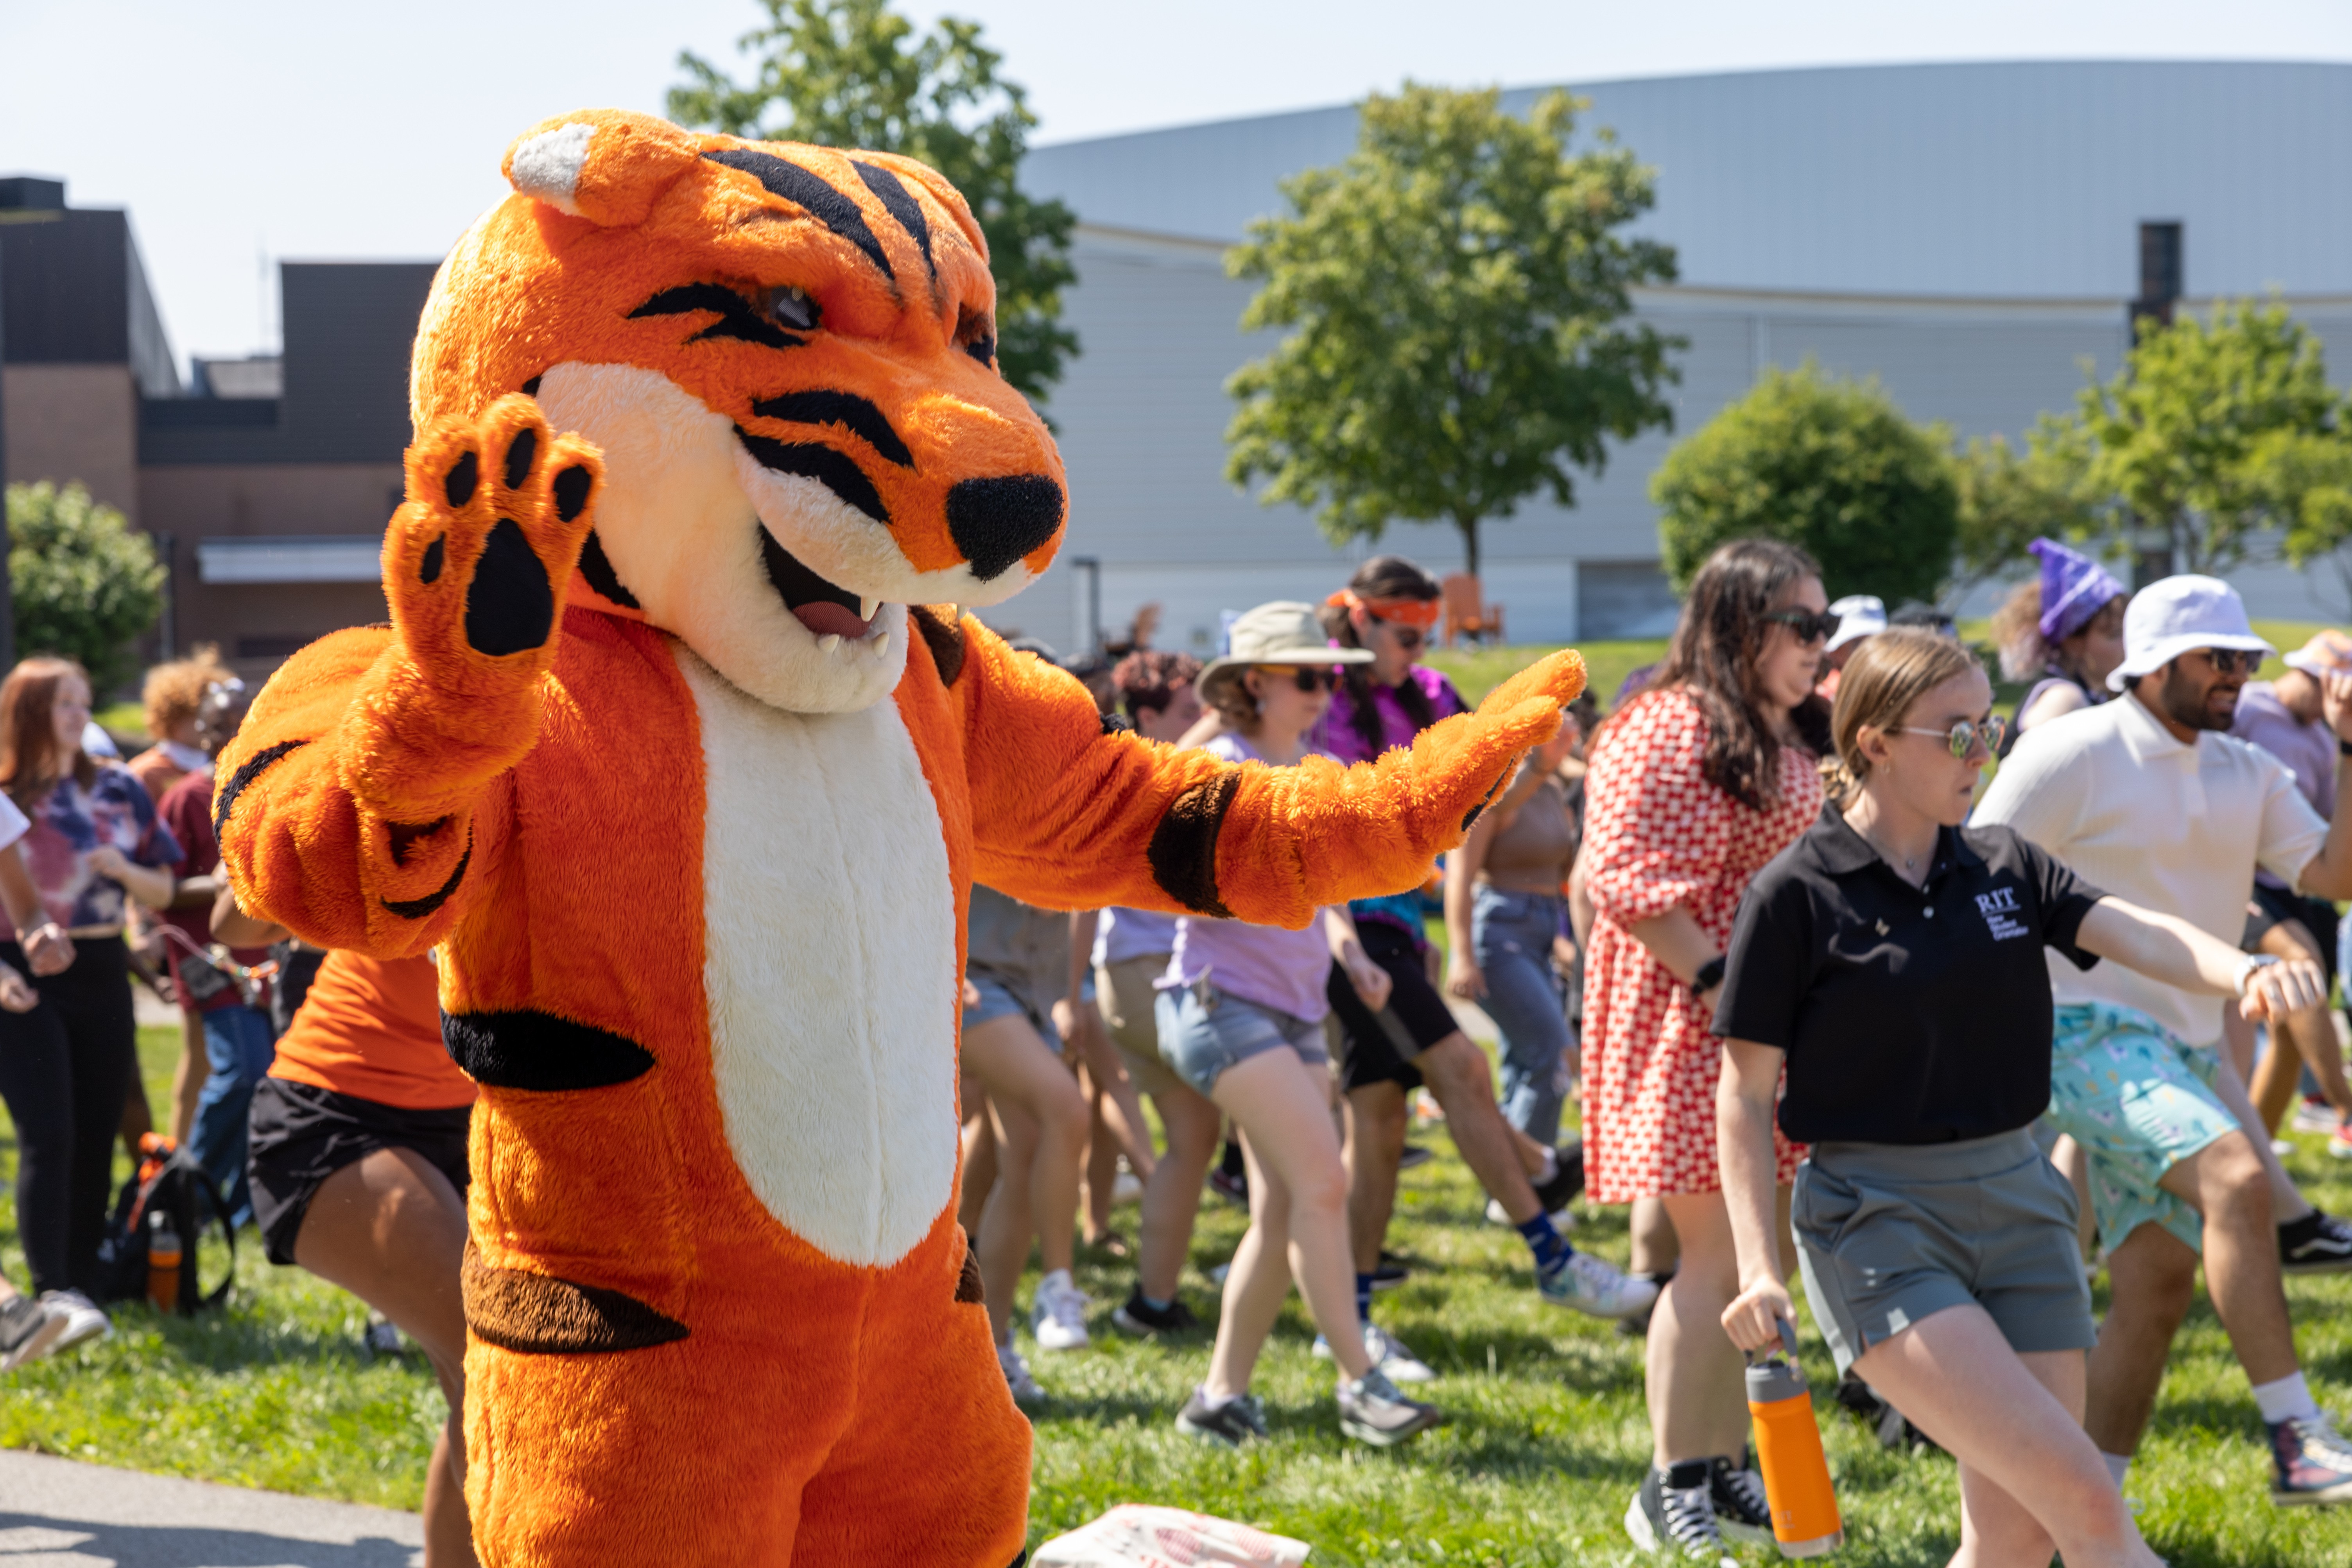 Ritchie dancing in the lawn with RIT students